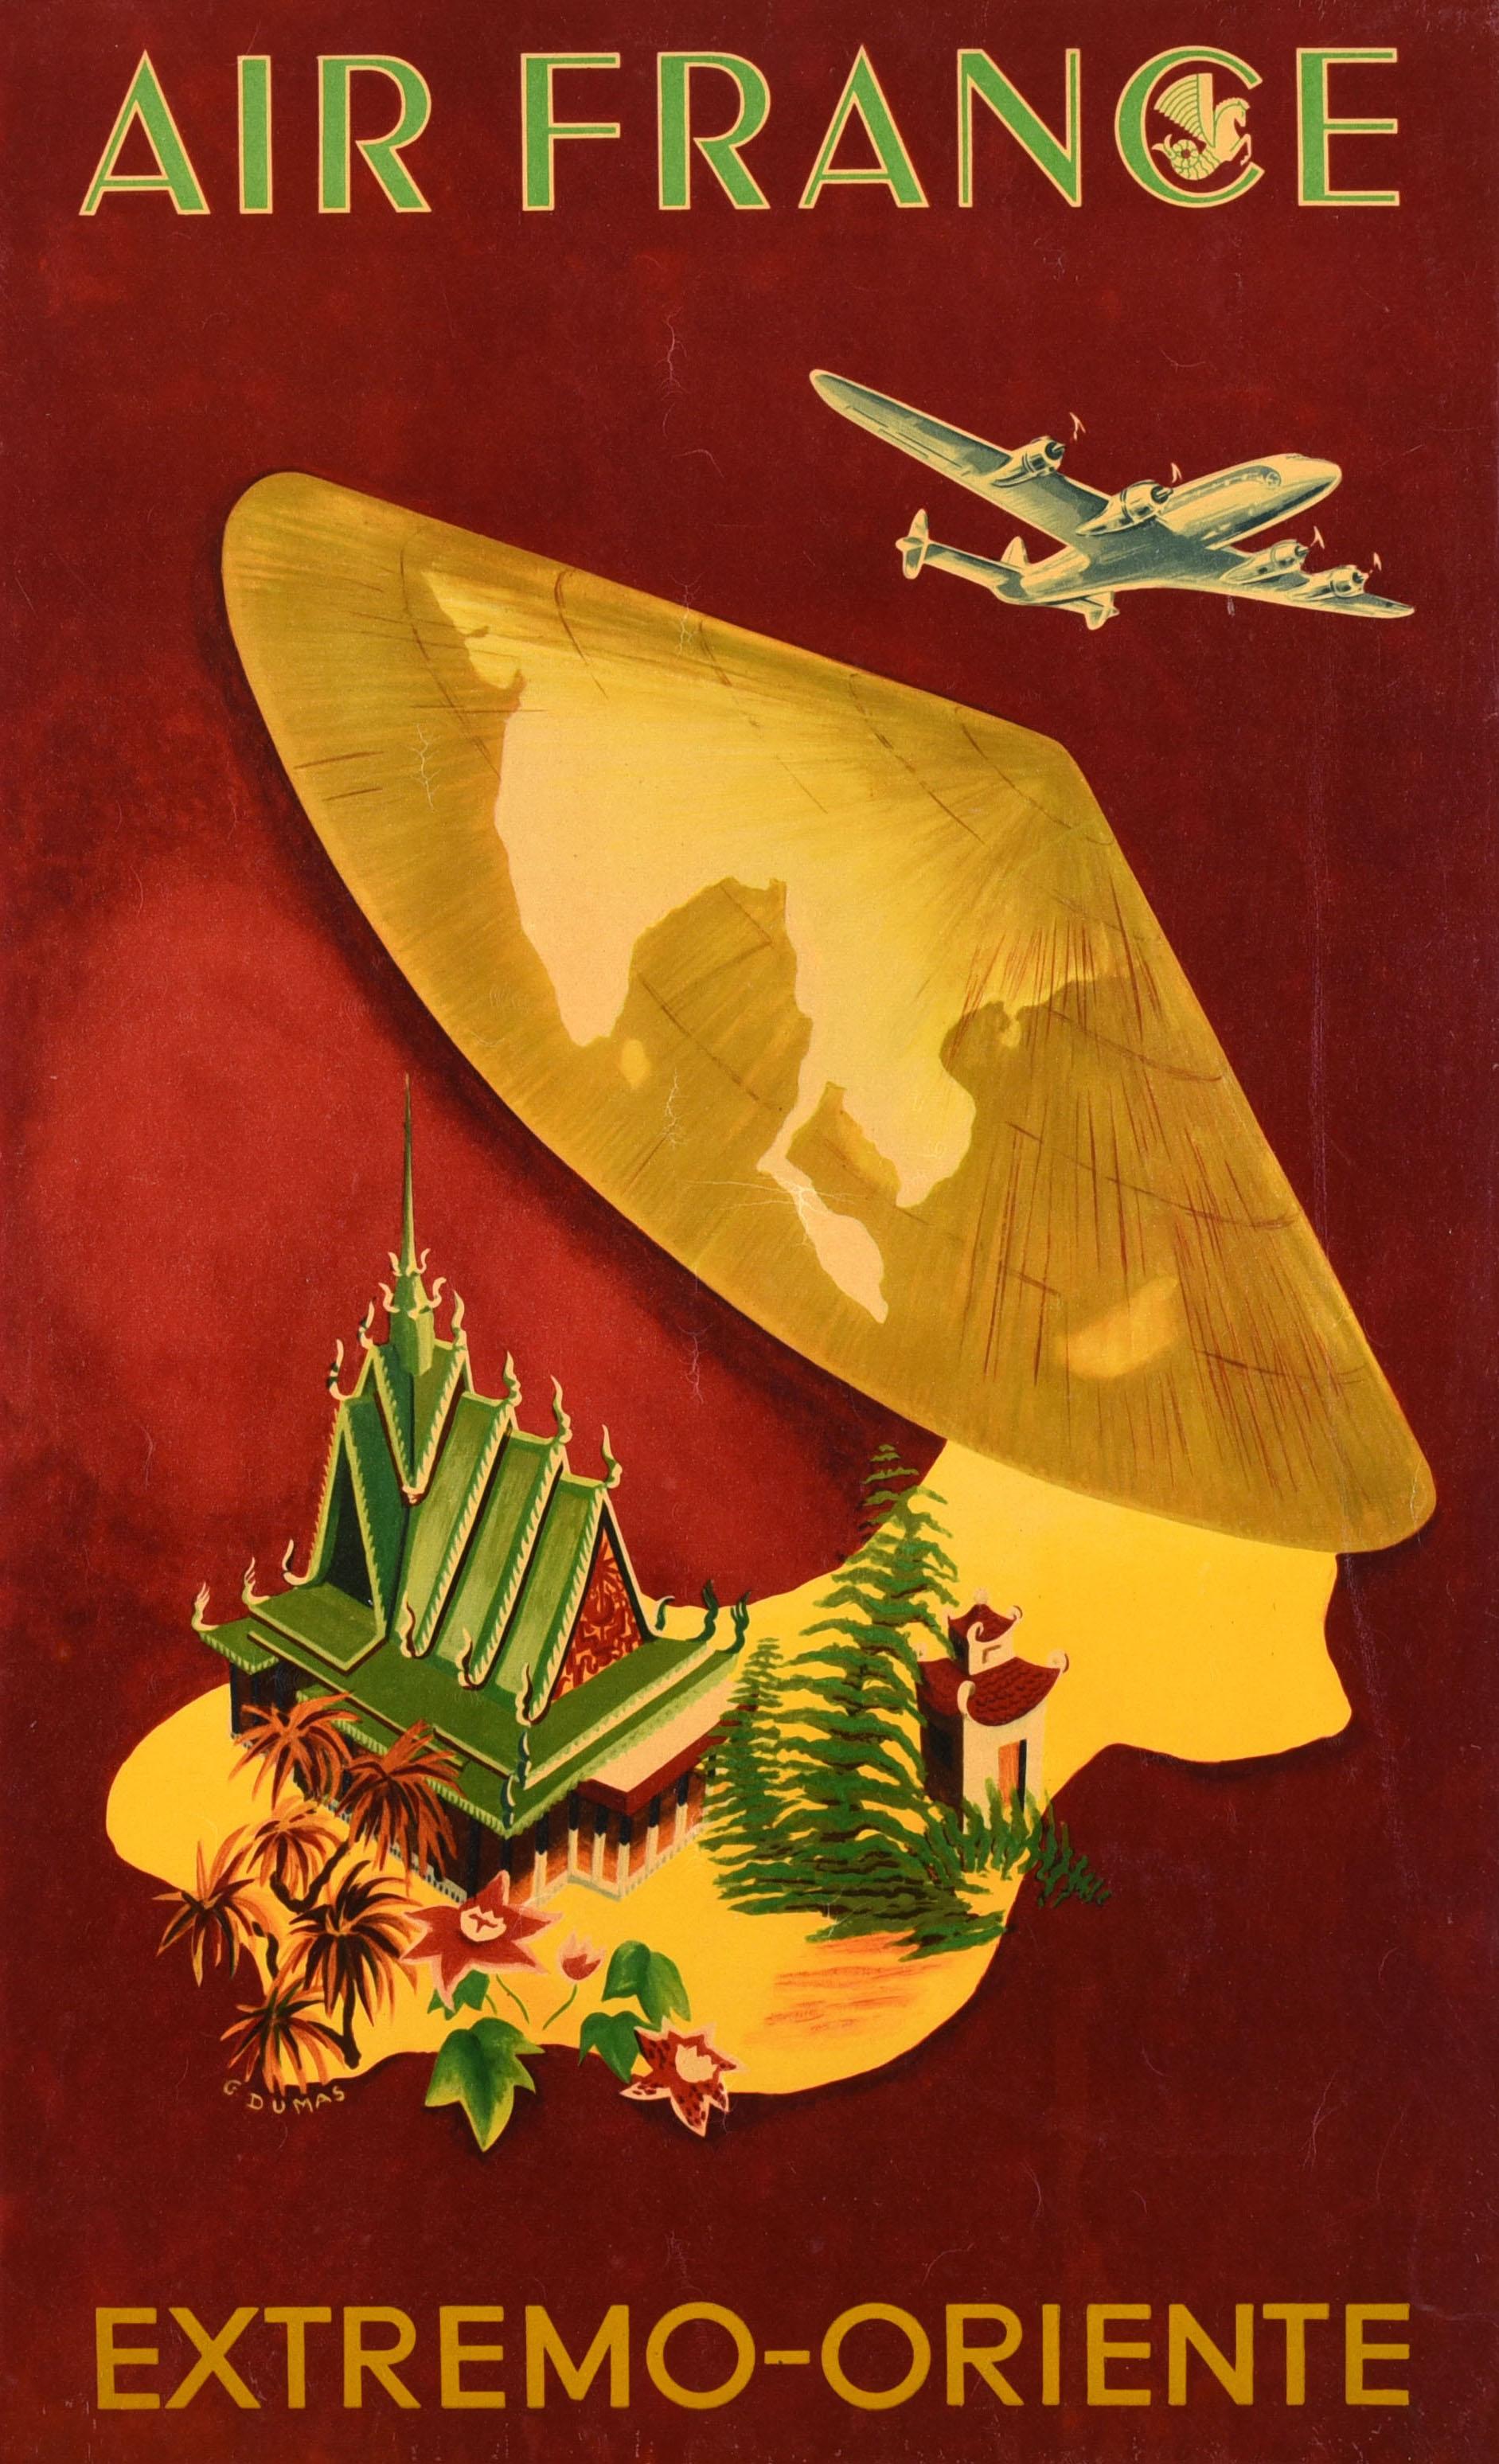 Original Vintage Travel Poster Air France Airline Extremo Oriente Far East Asia - Print by Unknown